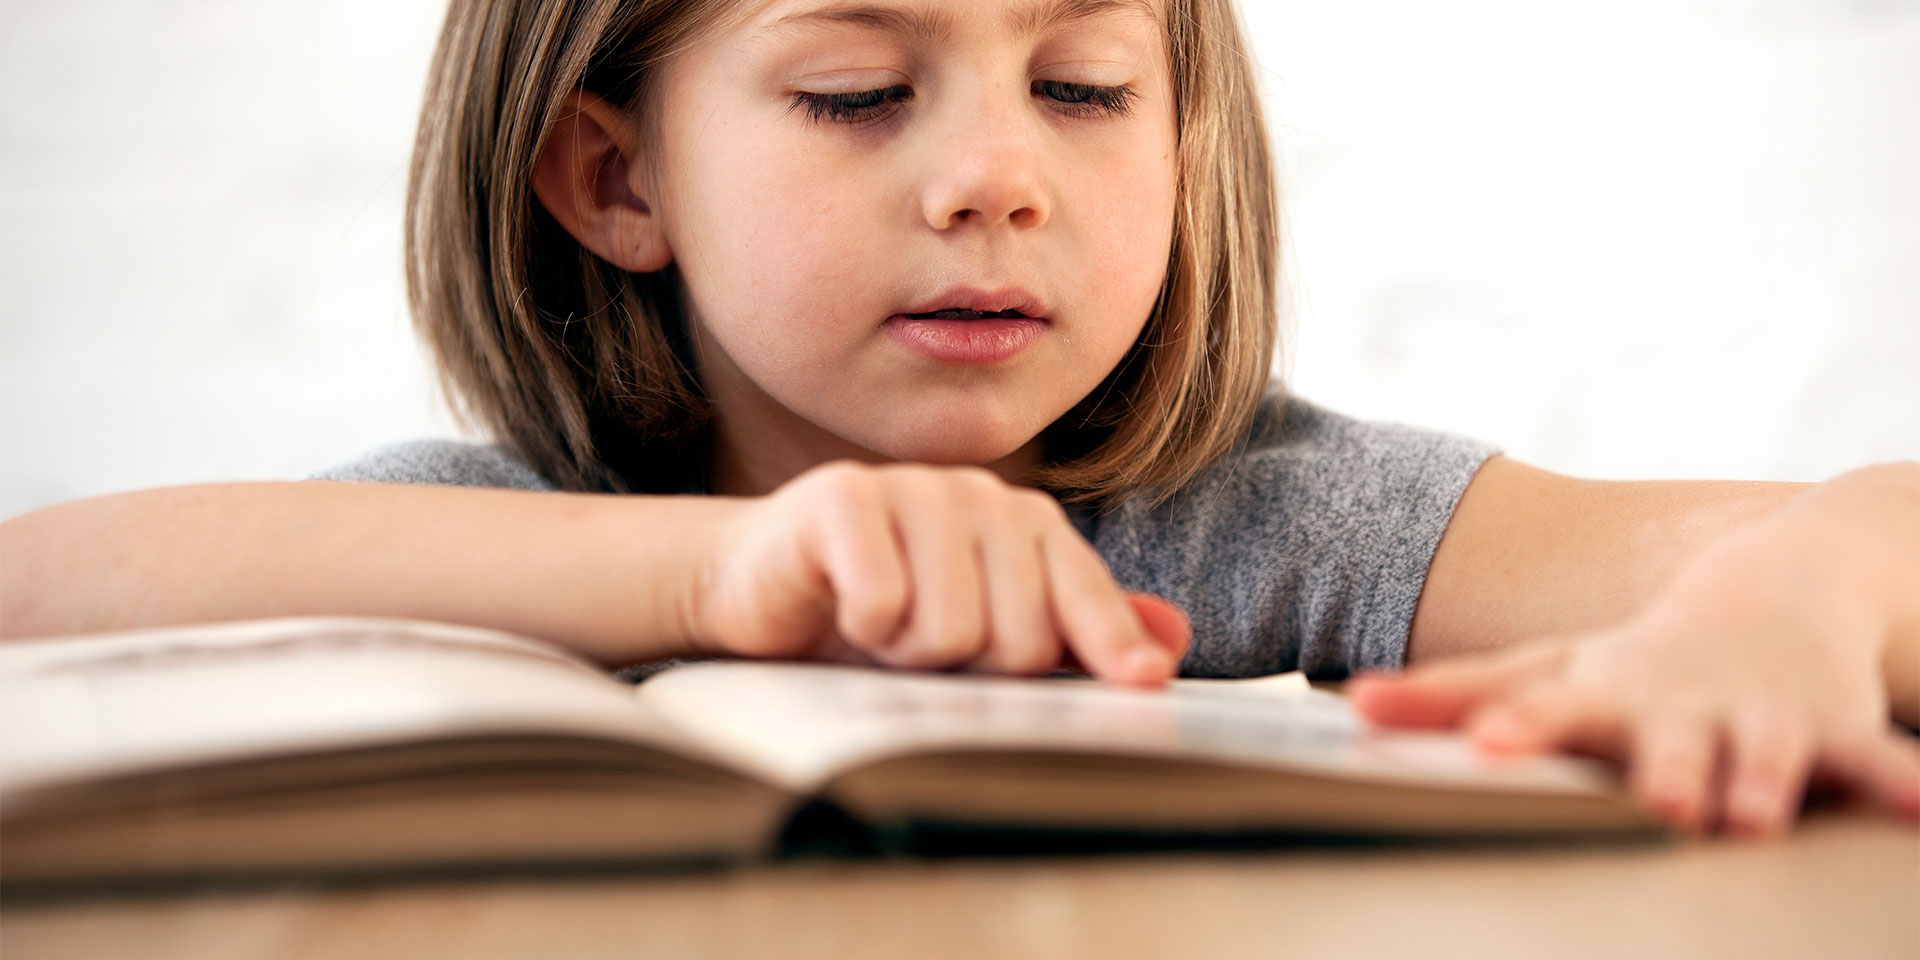 Methods to motivate a child to draw closer to the Bible 